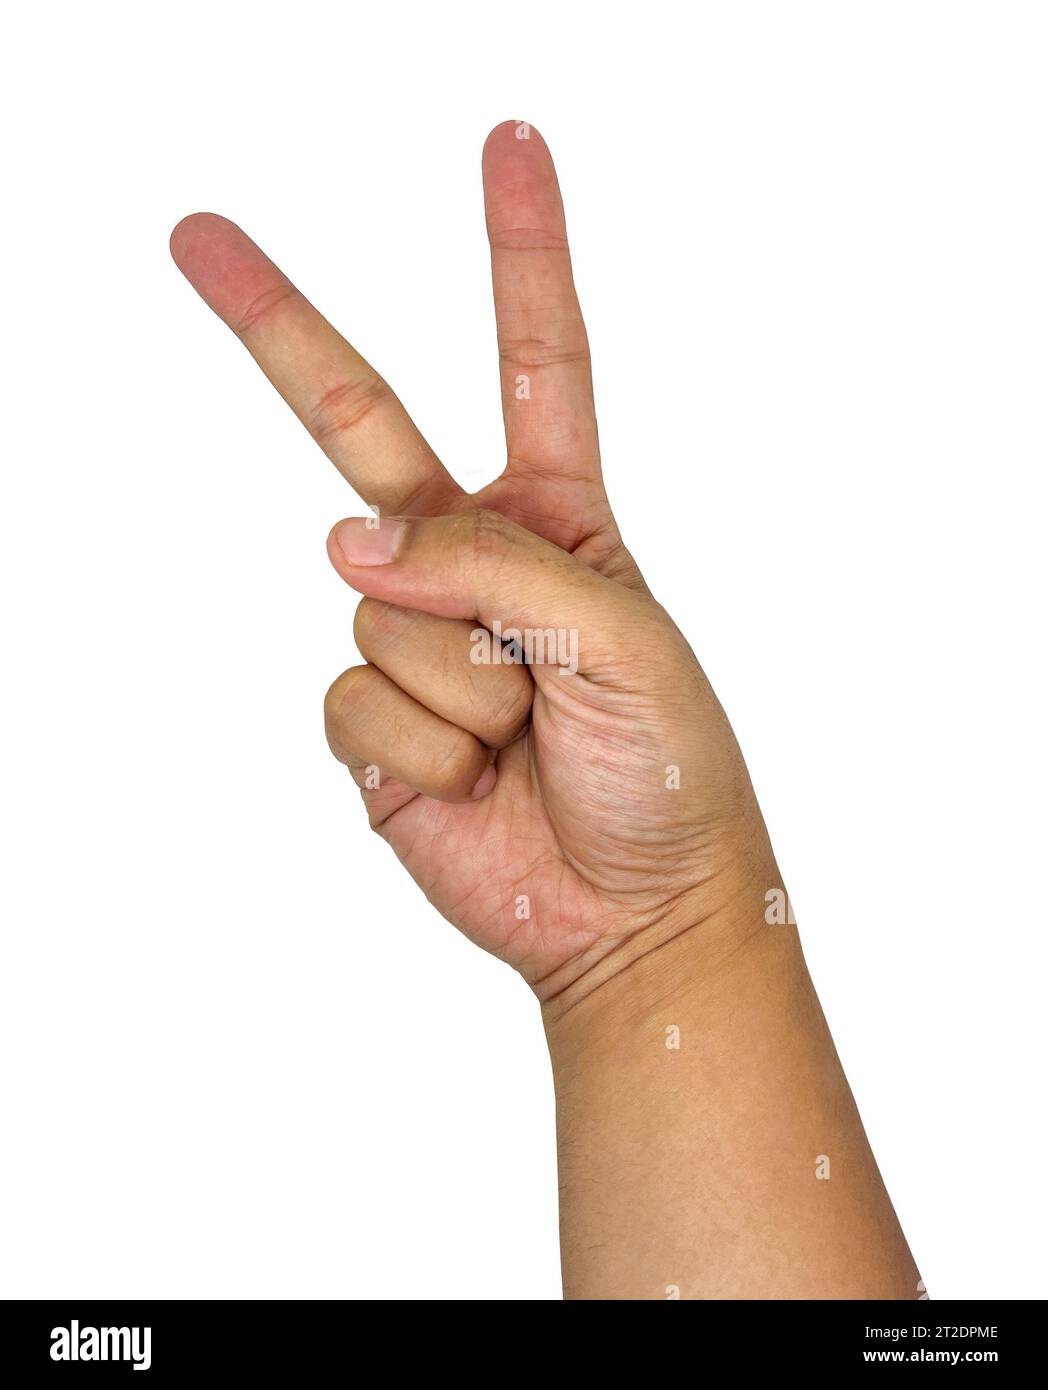 peace hand sign with white background Stock Photo